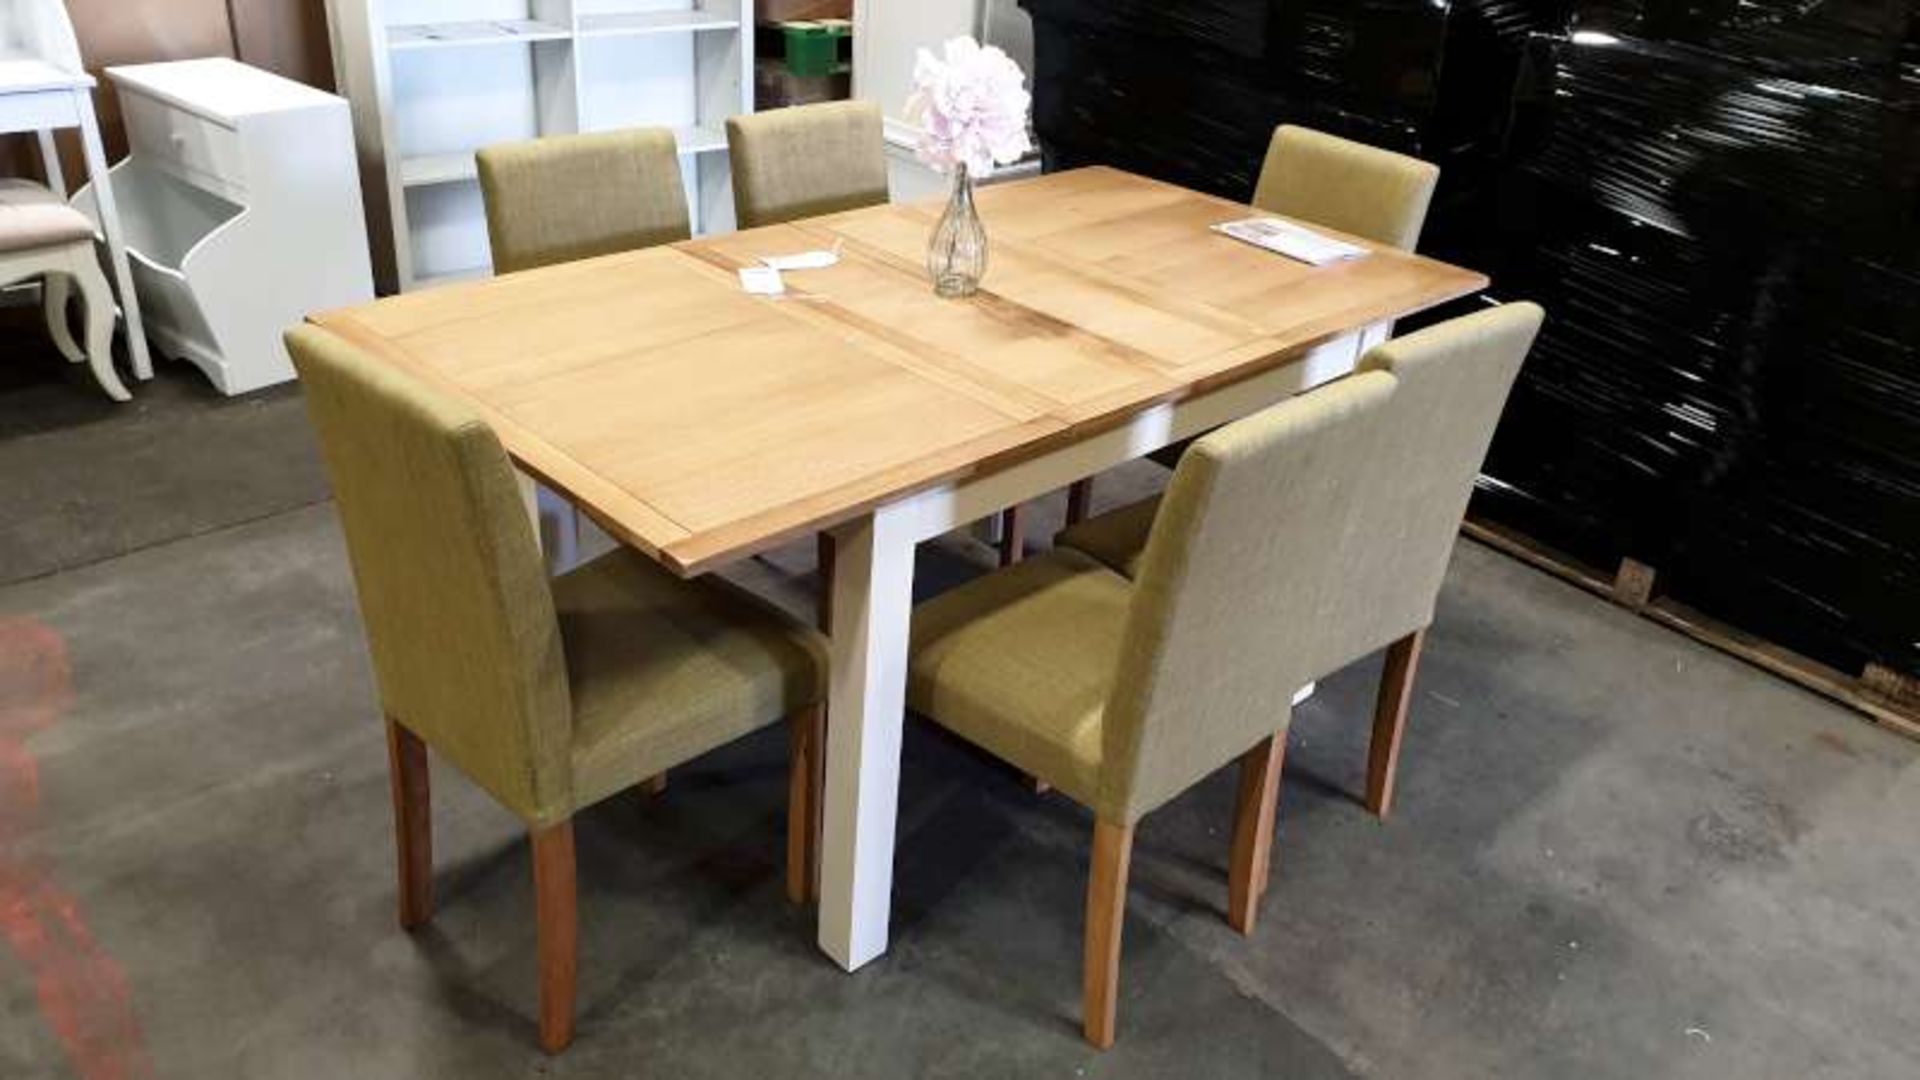 BRAND NEW BOXED HARROGATE TWO TONE EXTENDING DINING TABLE WITH 6 CHAIRS H 765MM L 1700MM W 900MM